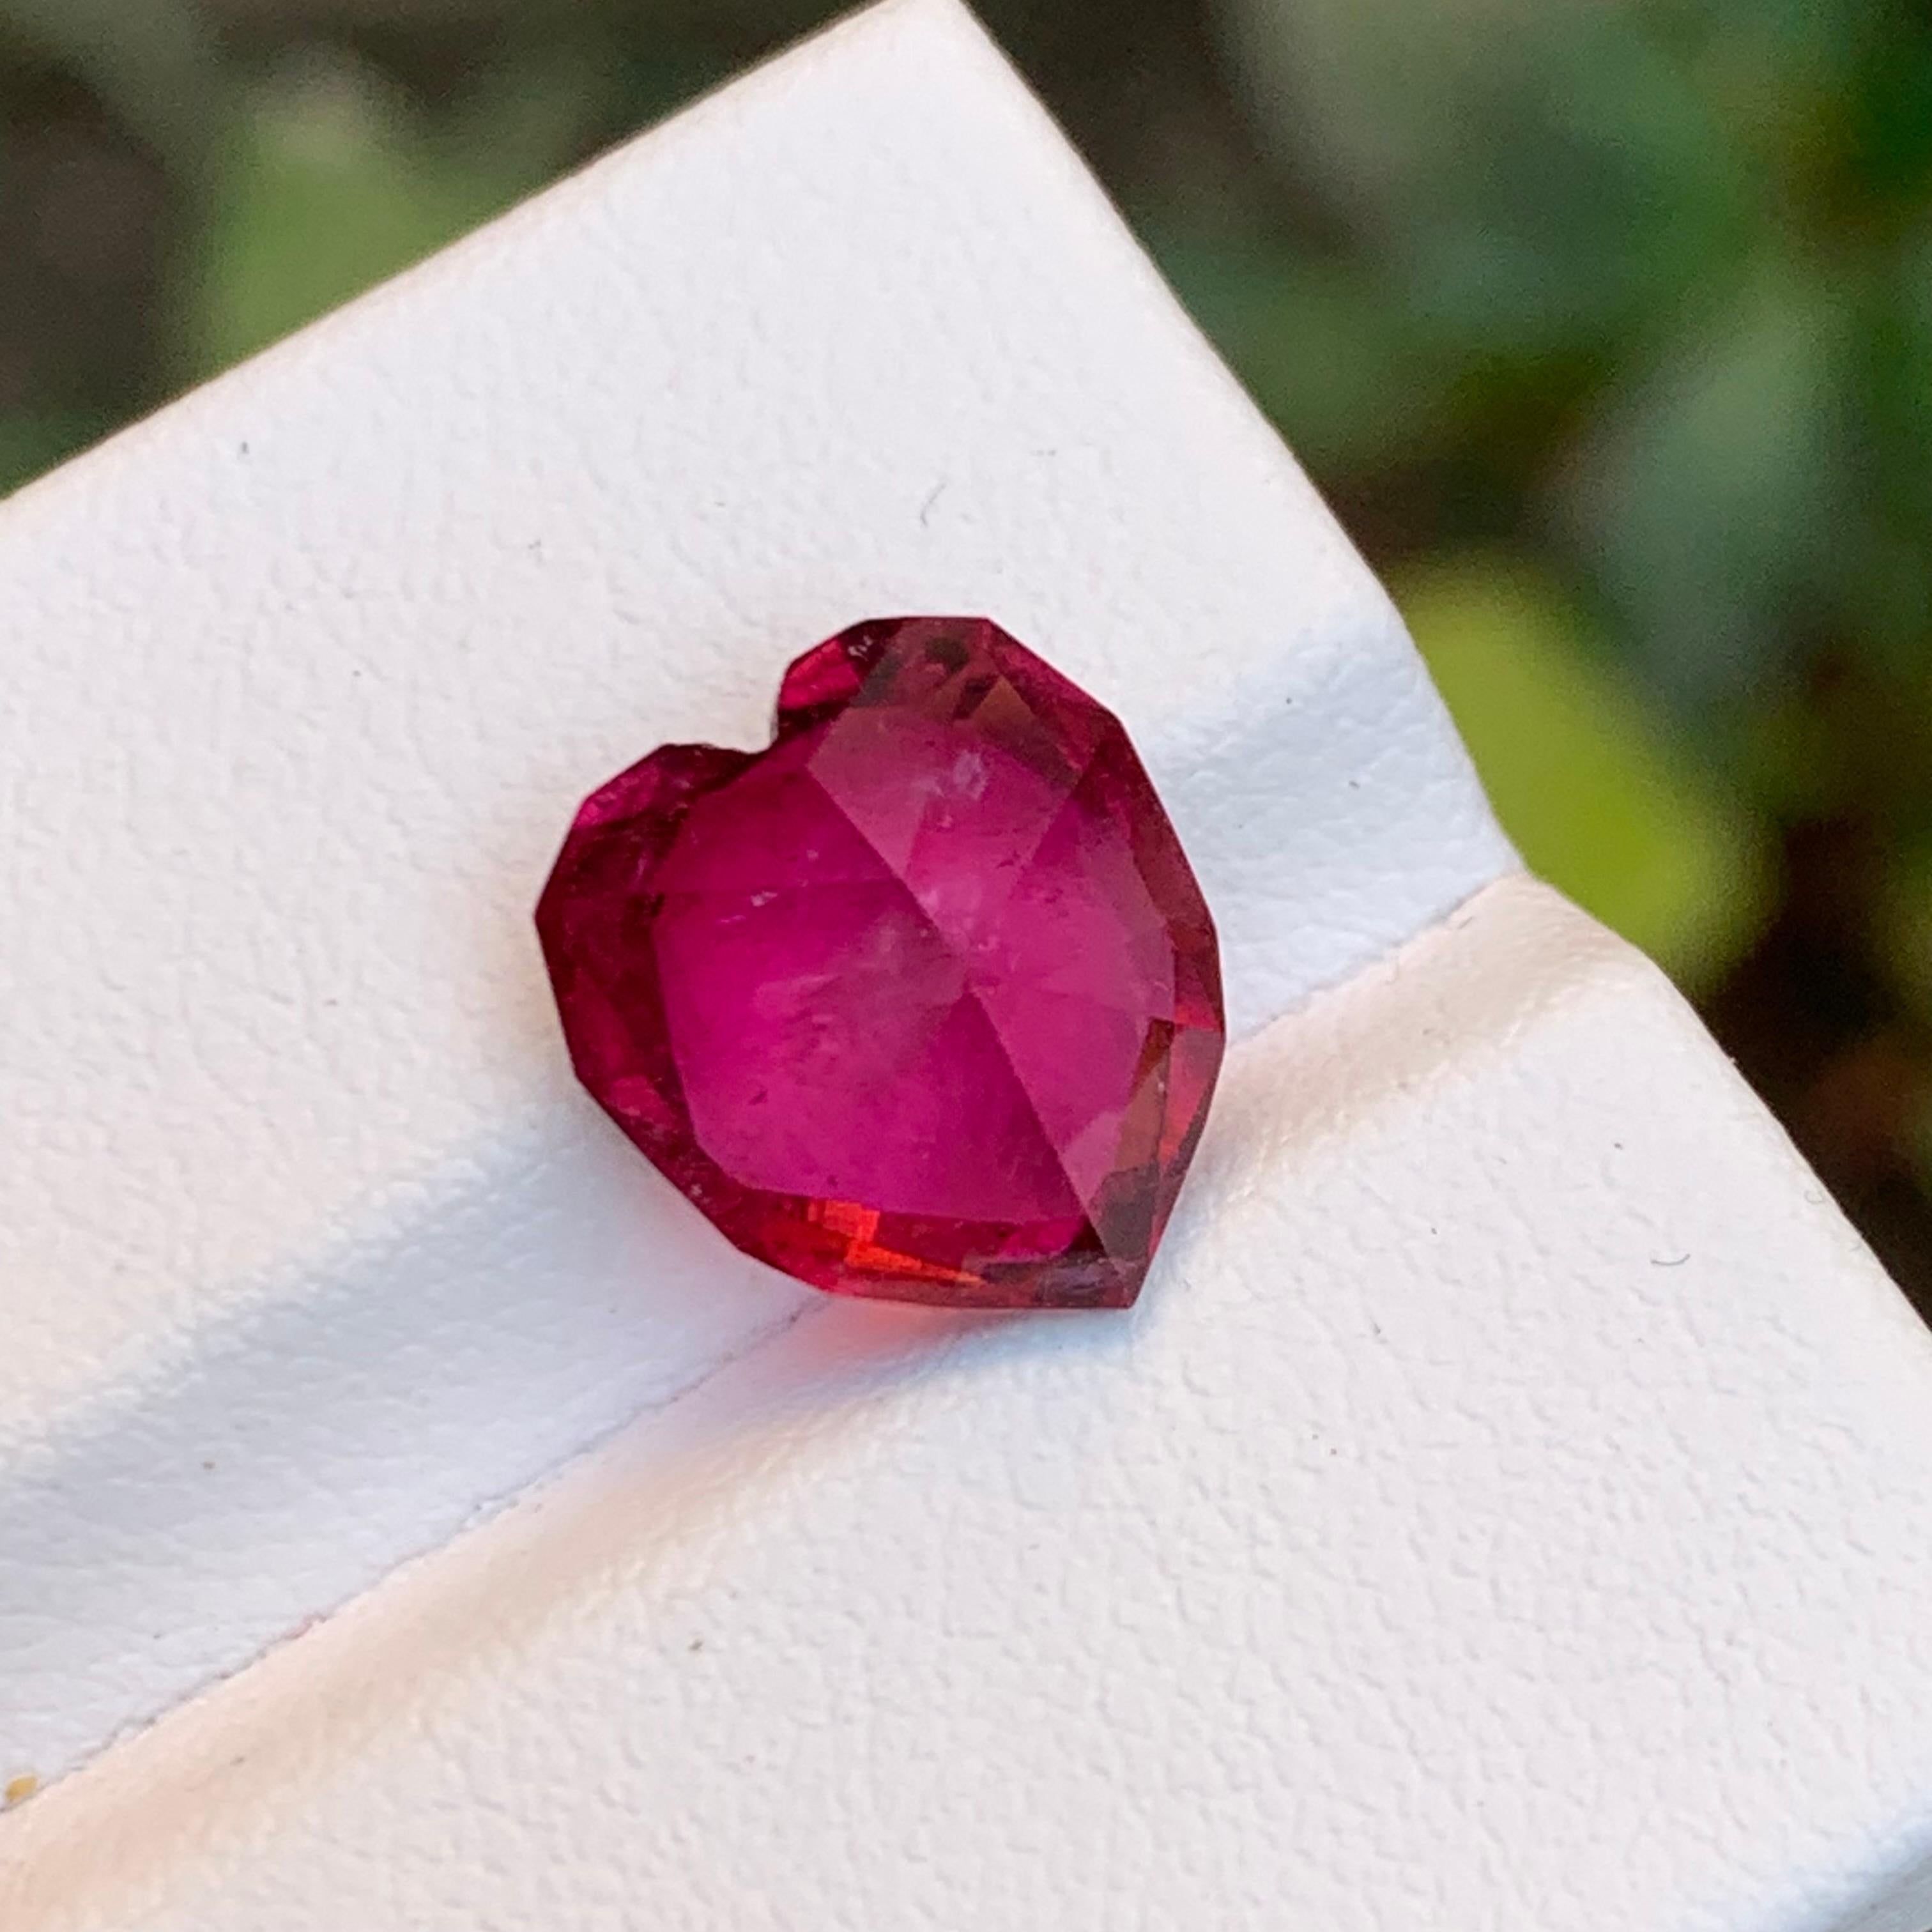 Heart Cut Rare Red Pink Natural Rubellite Tourmaline 4.70 Carat Brilliant Heart Shape Afg For Sale